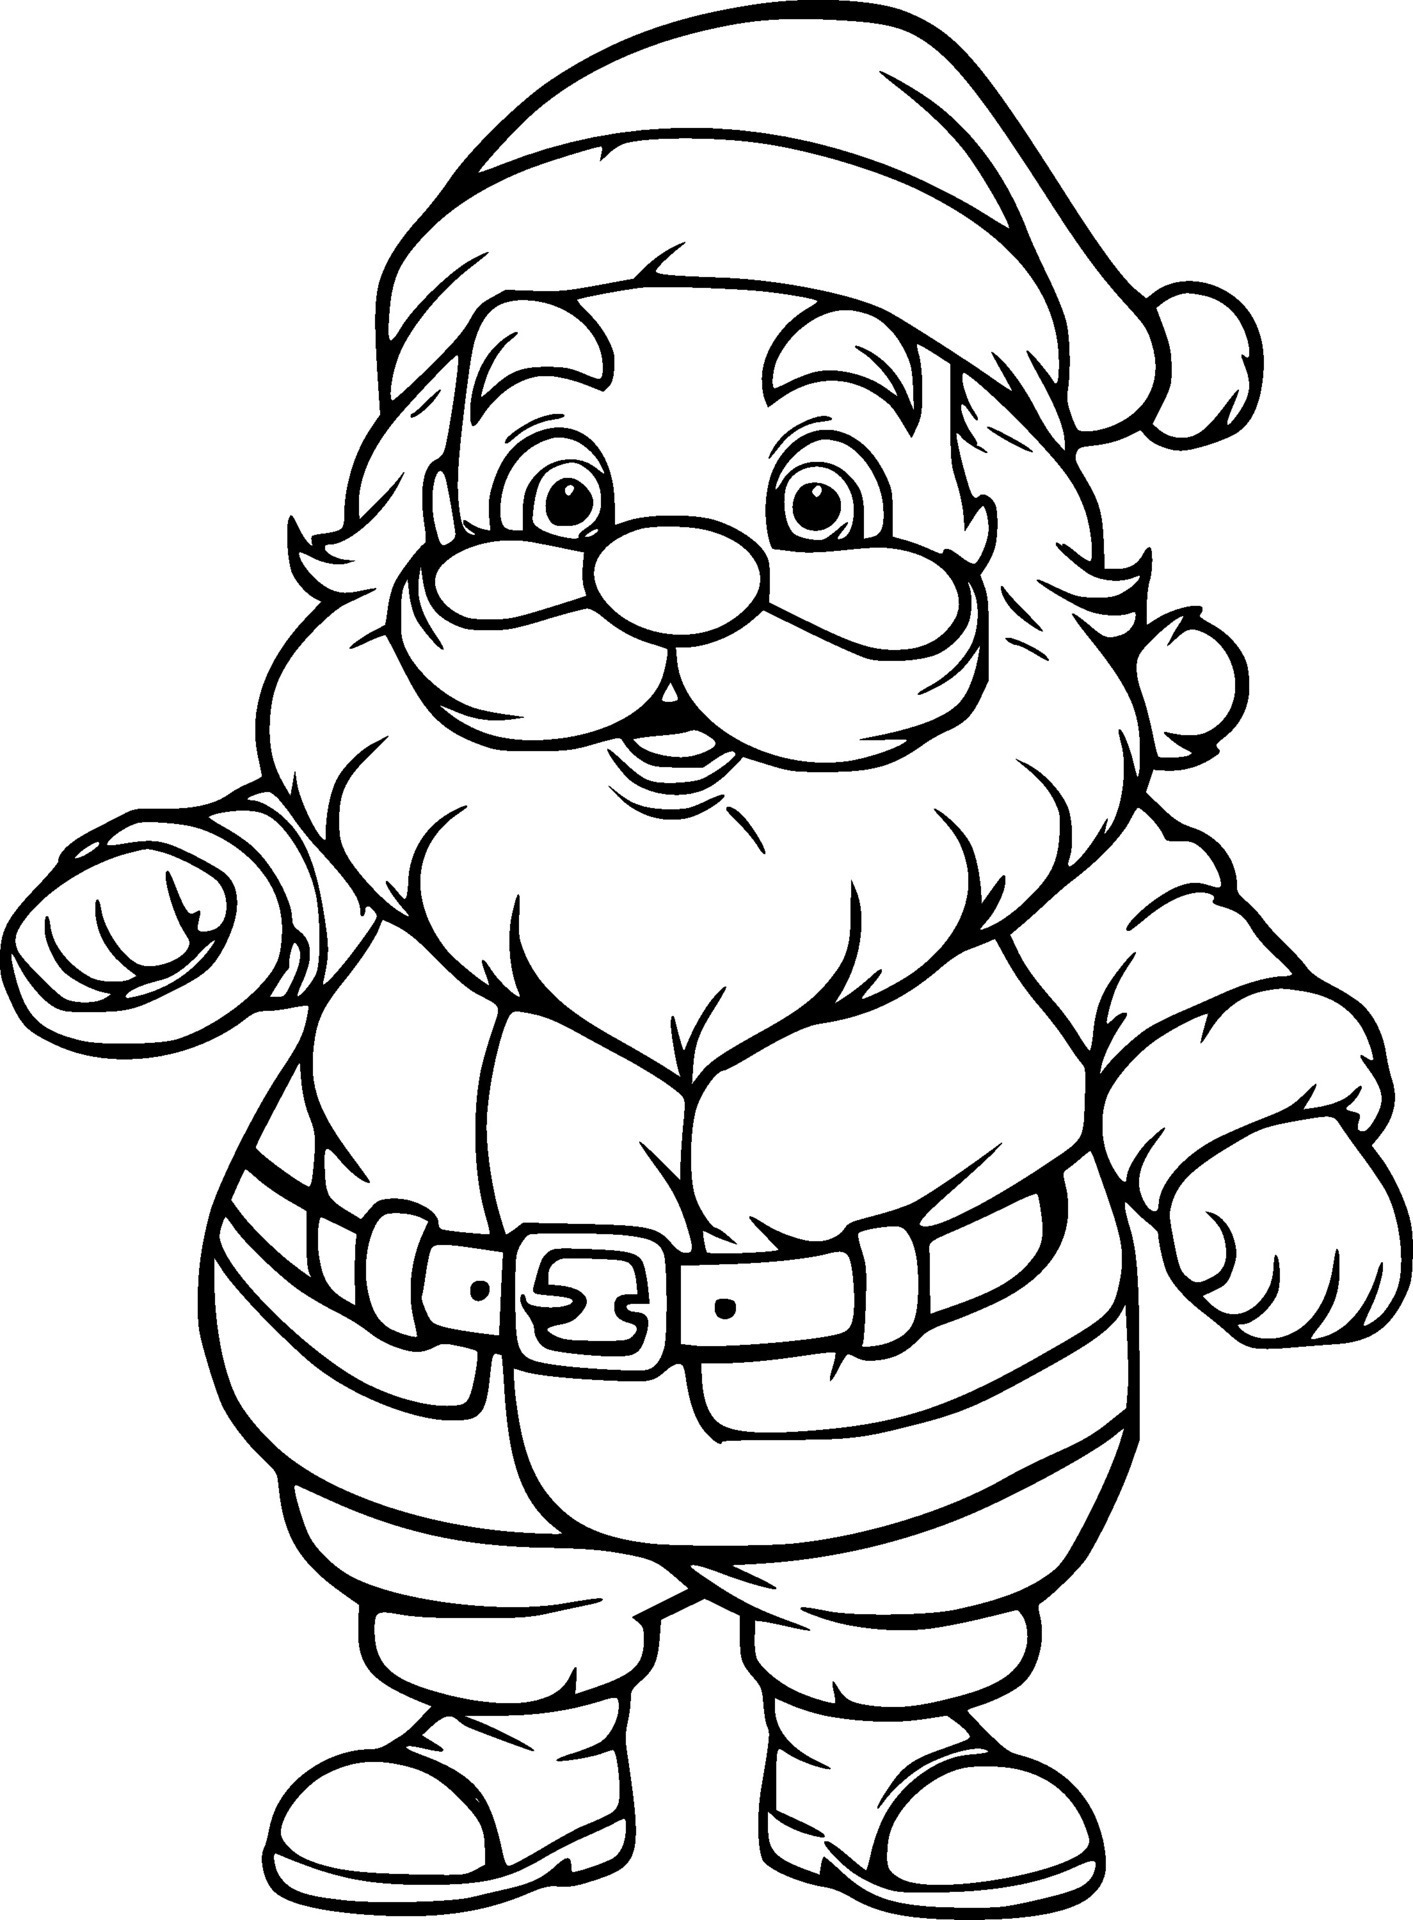 How to Draw a Santa Claus || Step by Step - Colour Drawing - YouTube-saigonsouth.com.vn